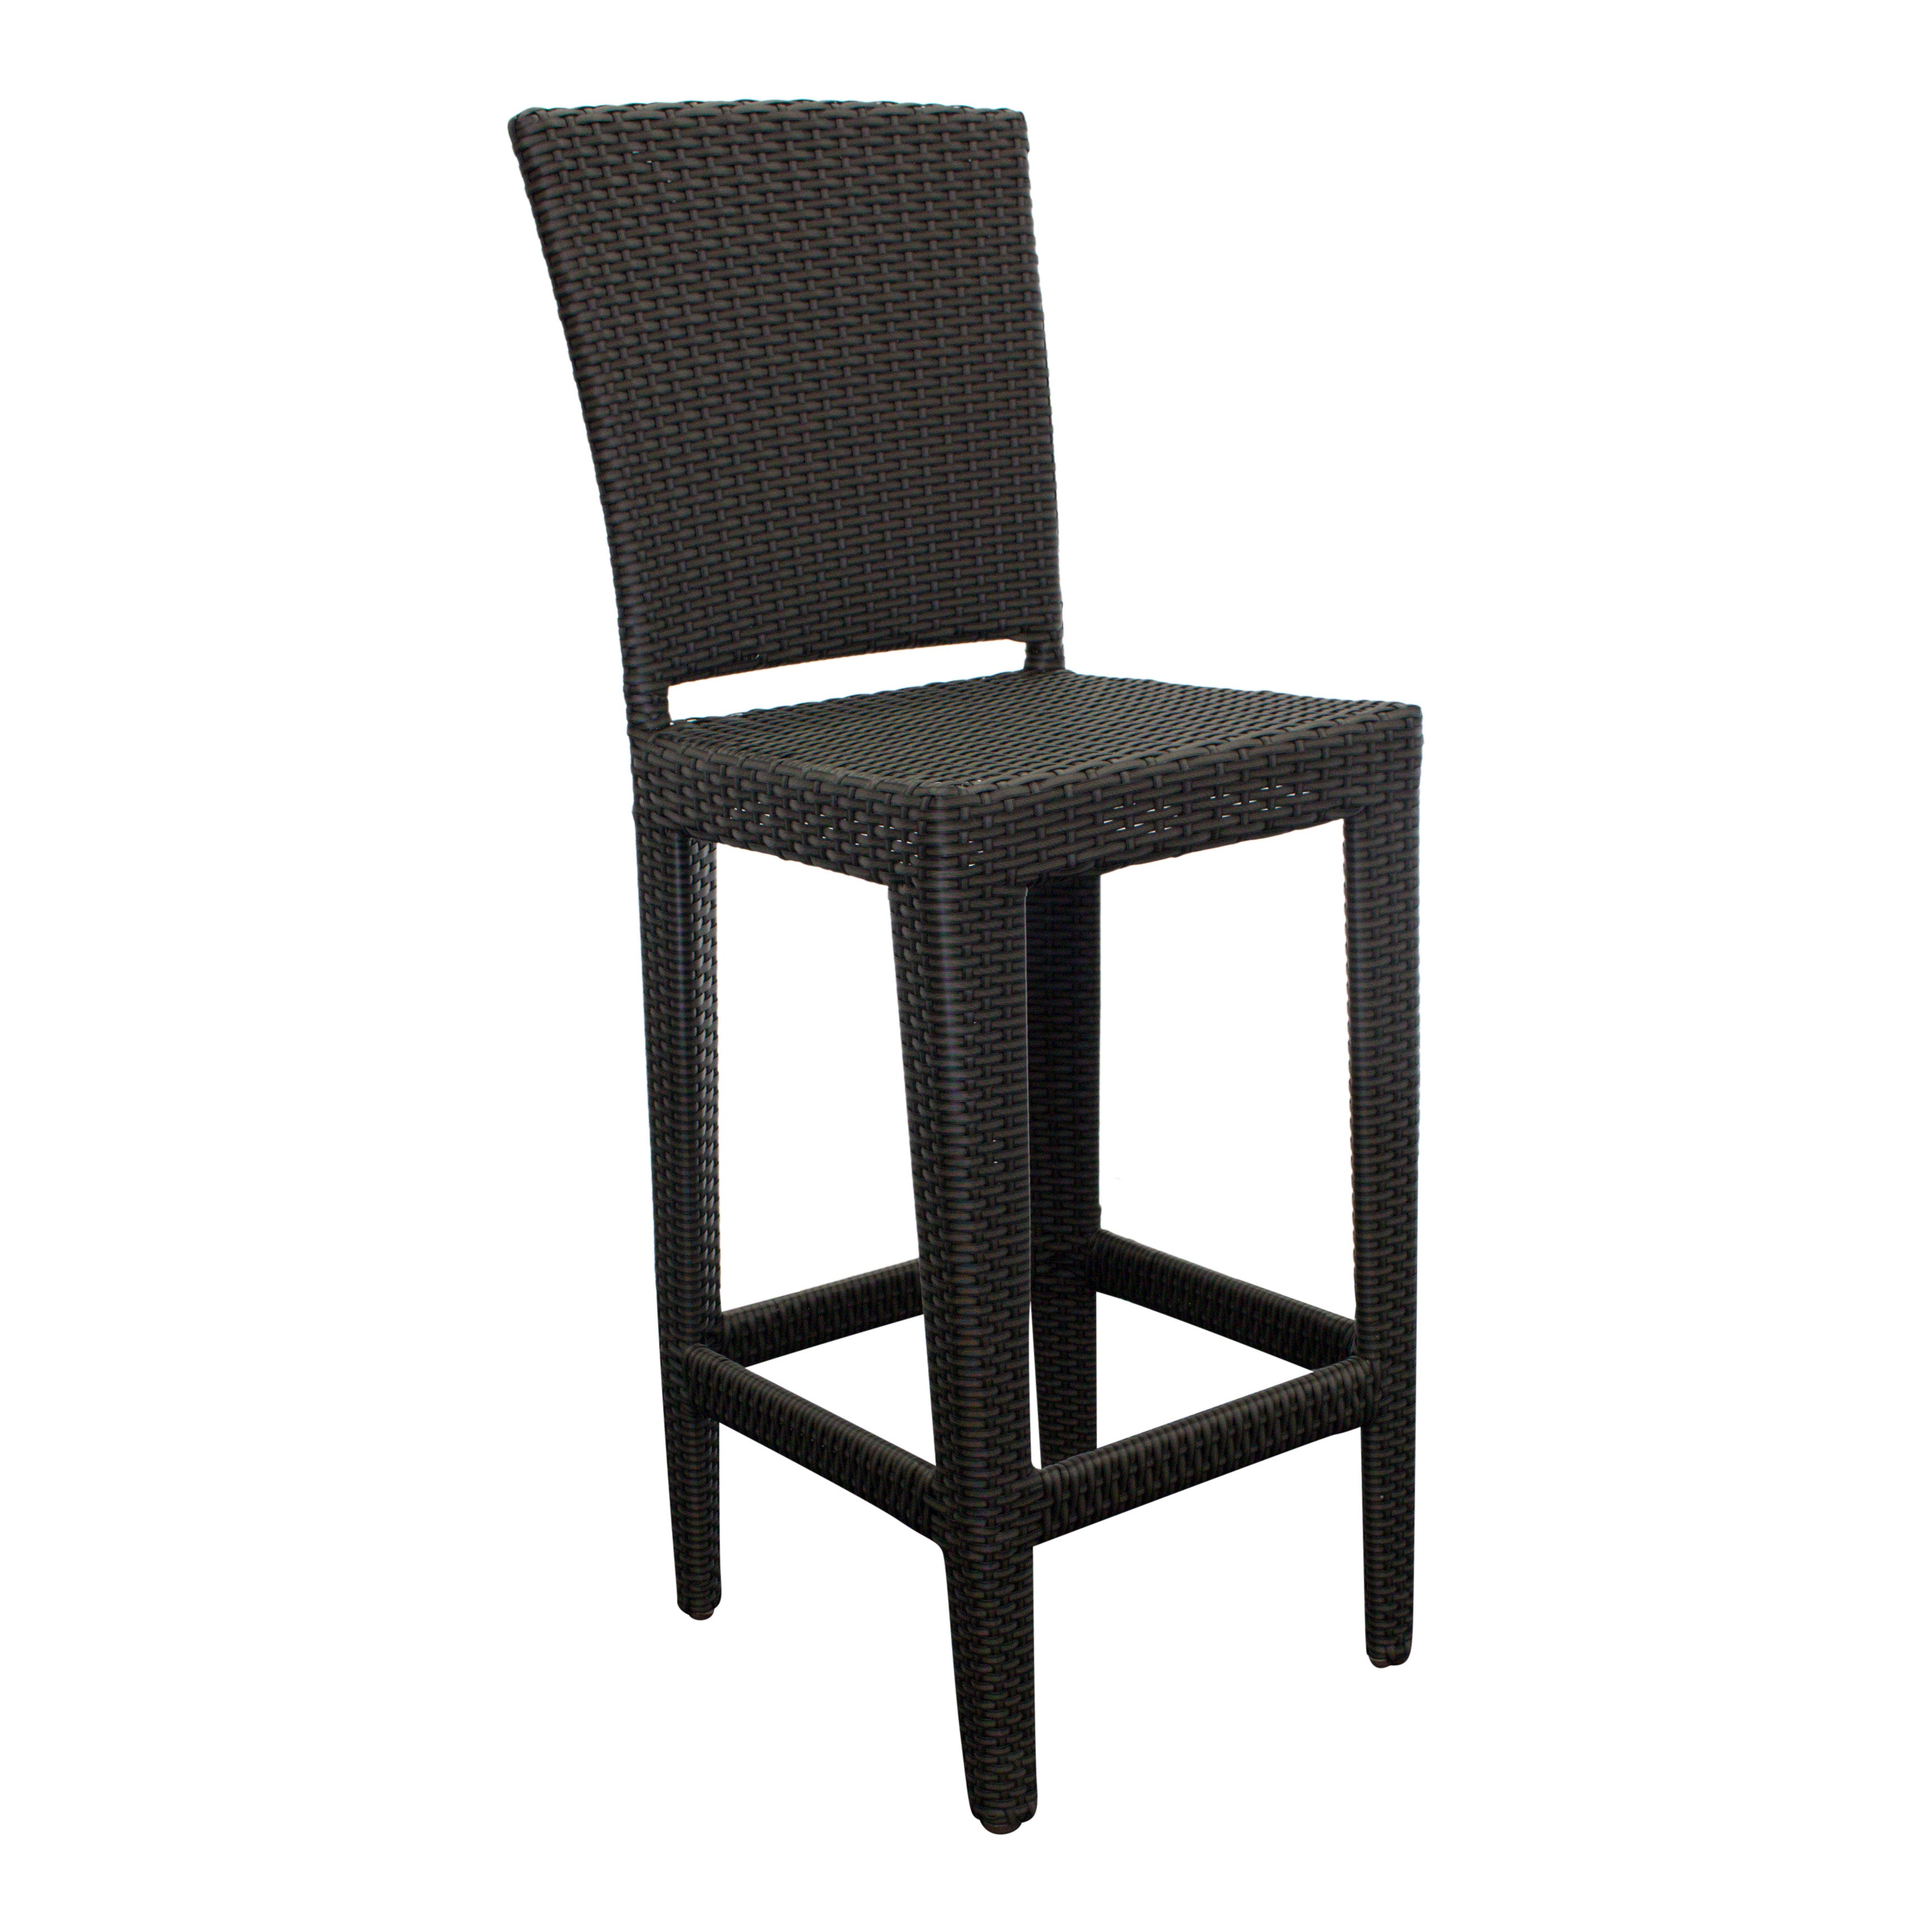 Fiesta Collection - Bar Chairs